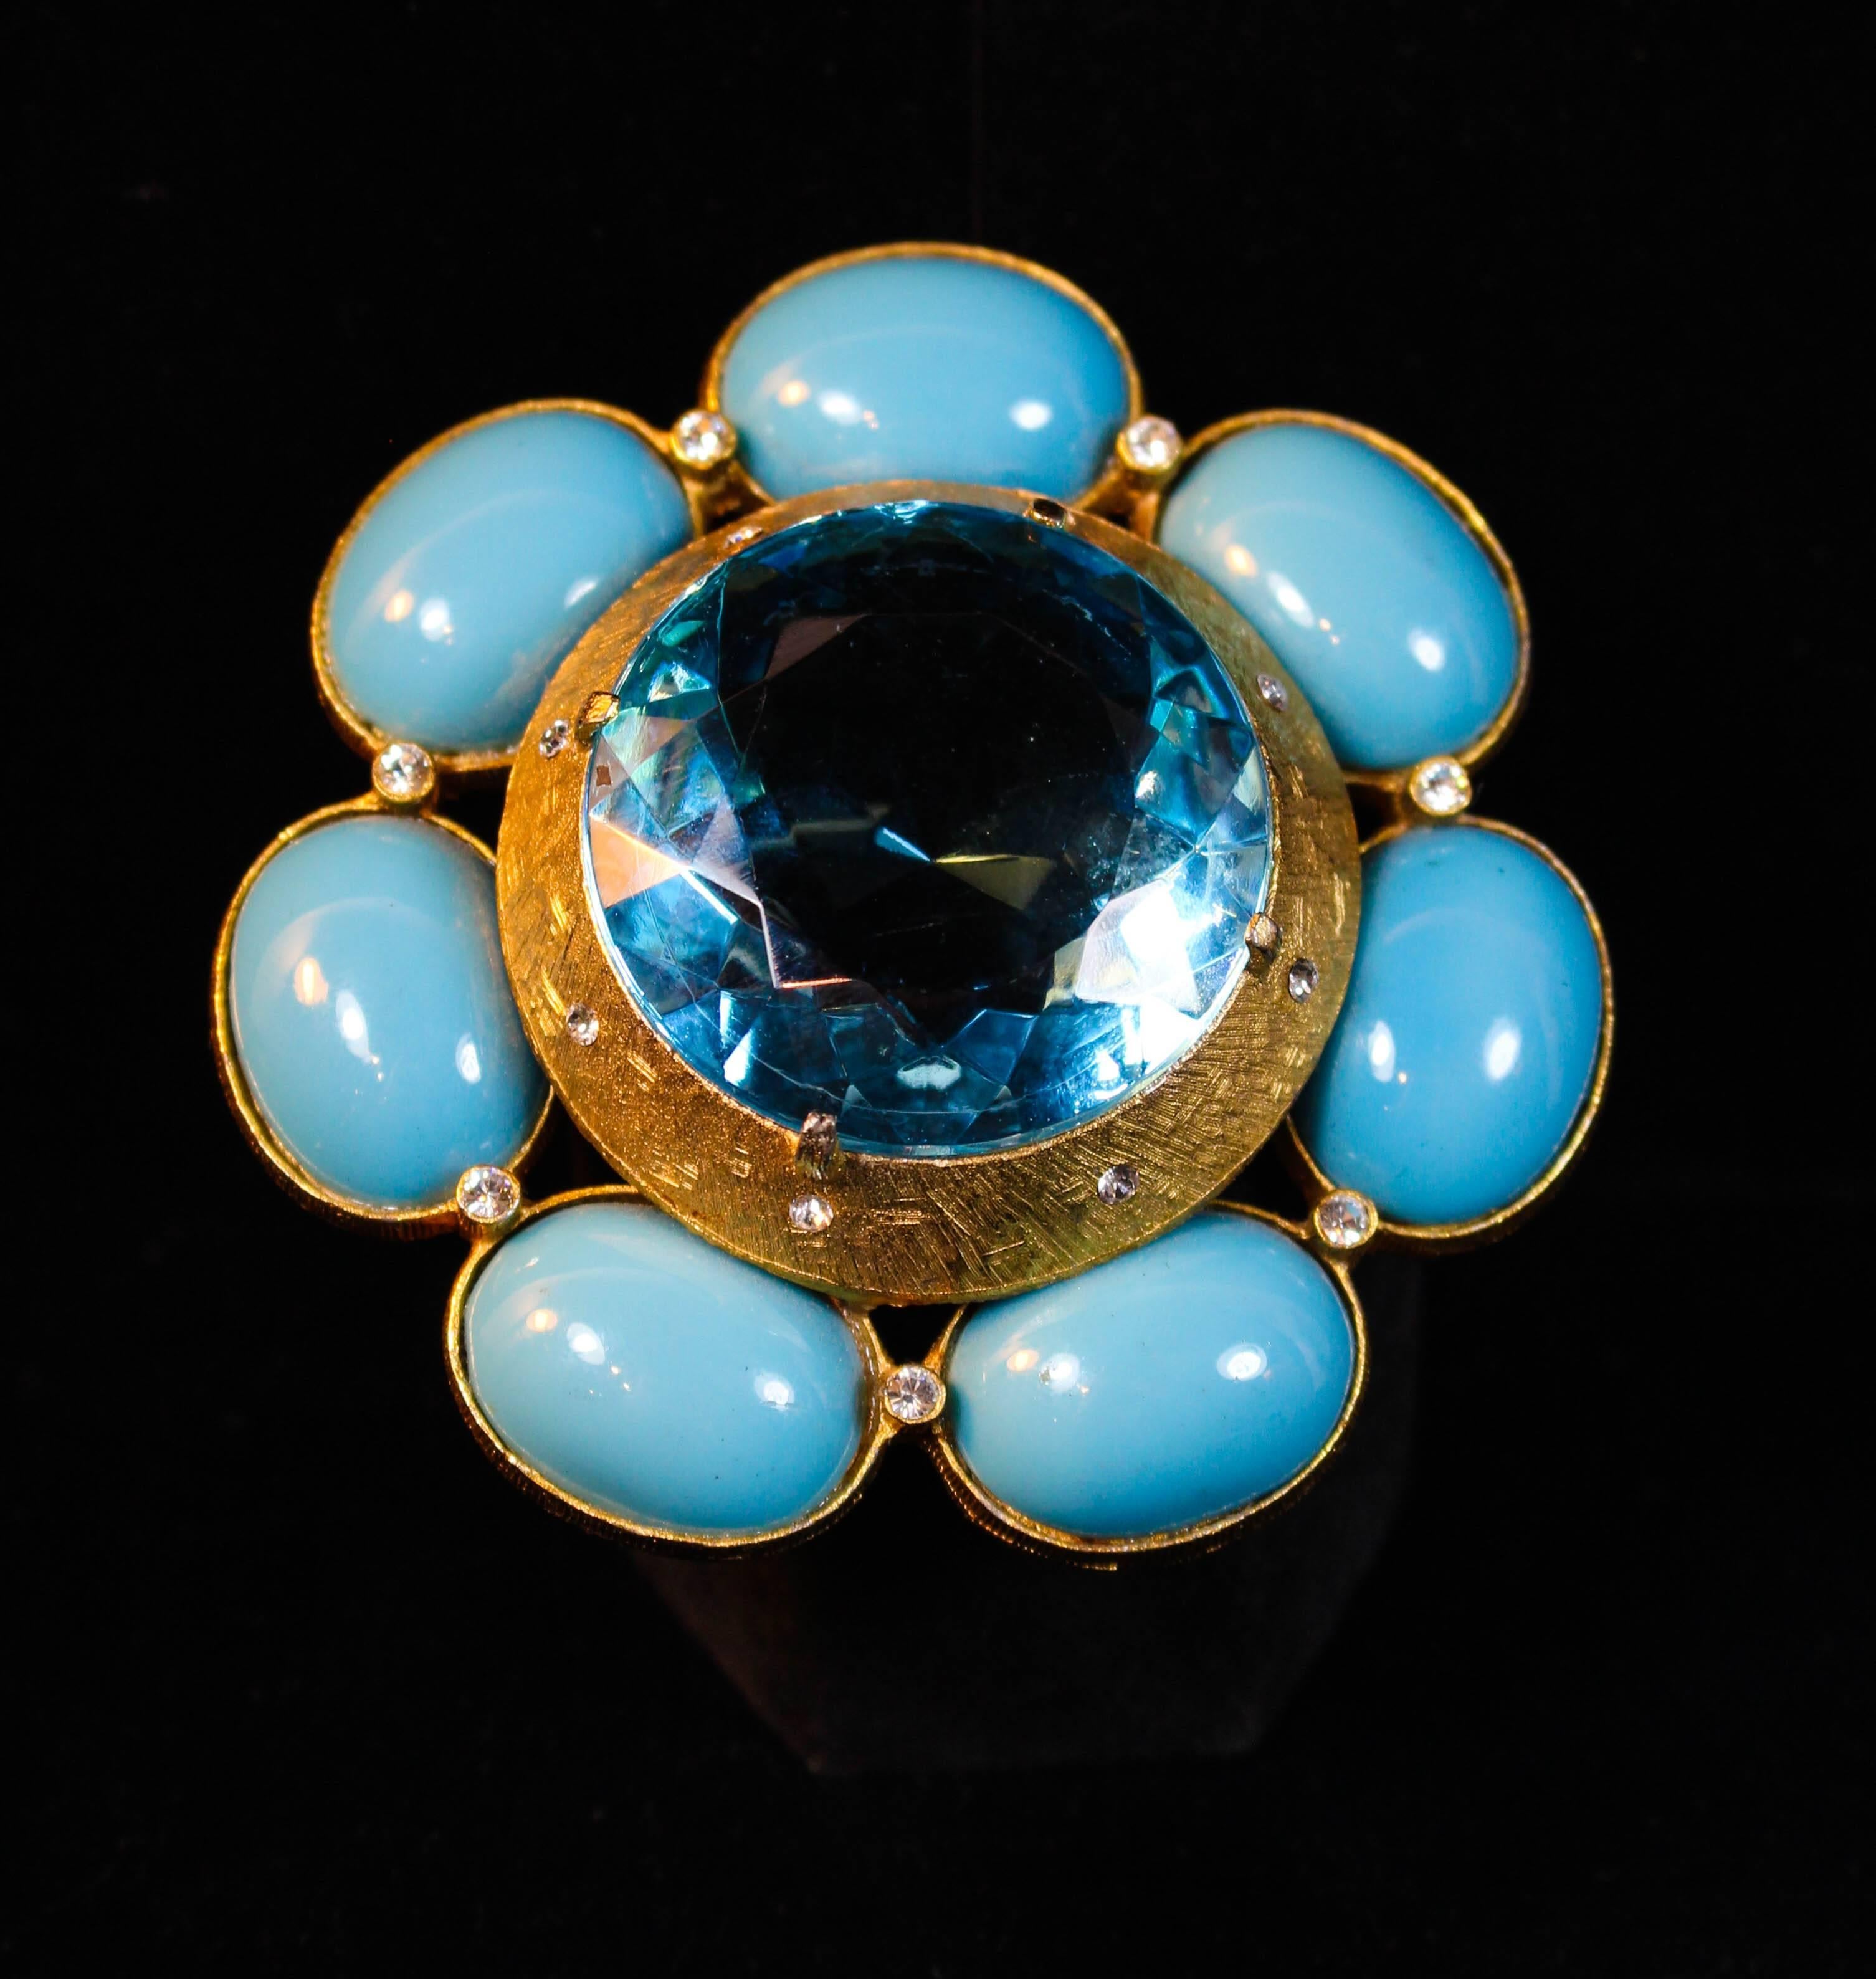 This Briana brooch is composed of a gold hue metal with a textured finished. Features an aqua colored center stone, flanked with turquoise stones, and rhinestone accents. In excellent vintage condition.

**Please cross-reference measurements for